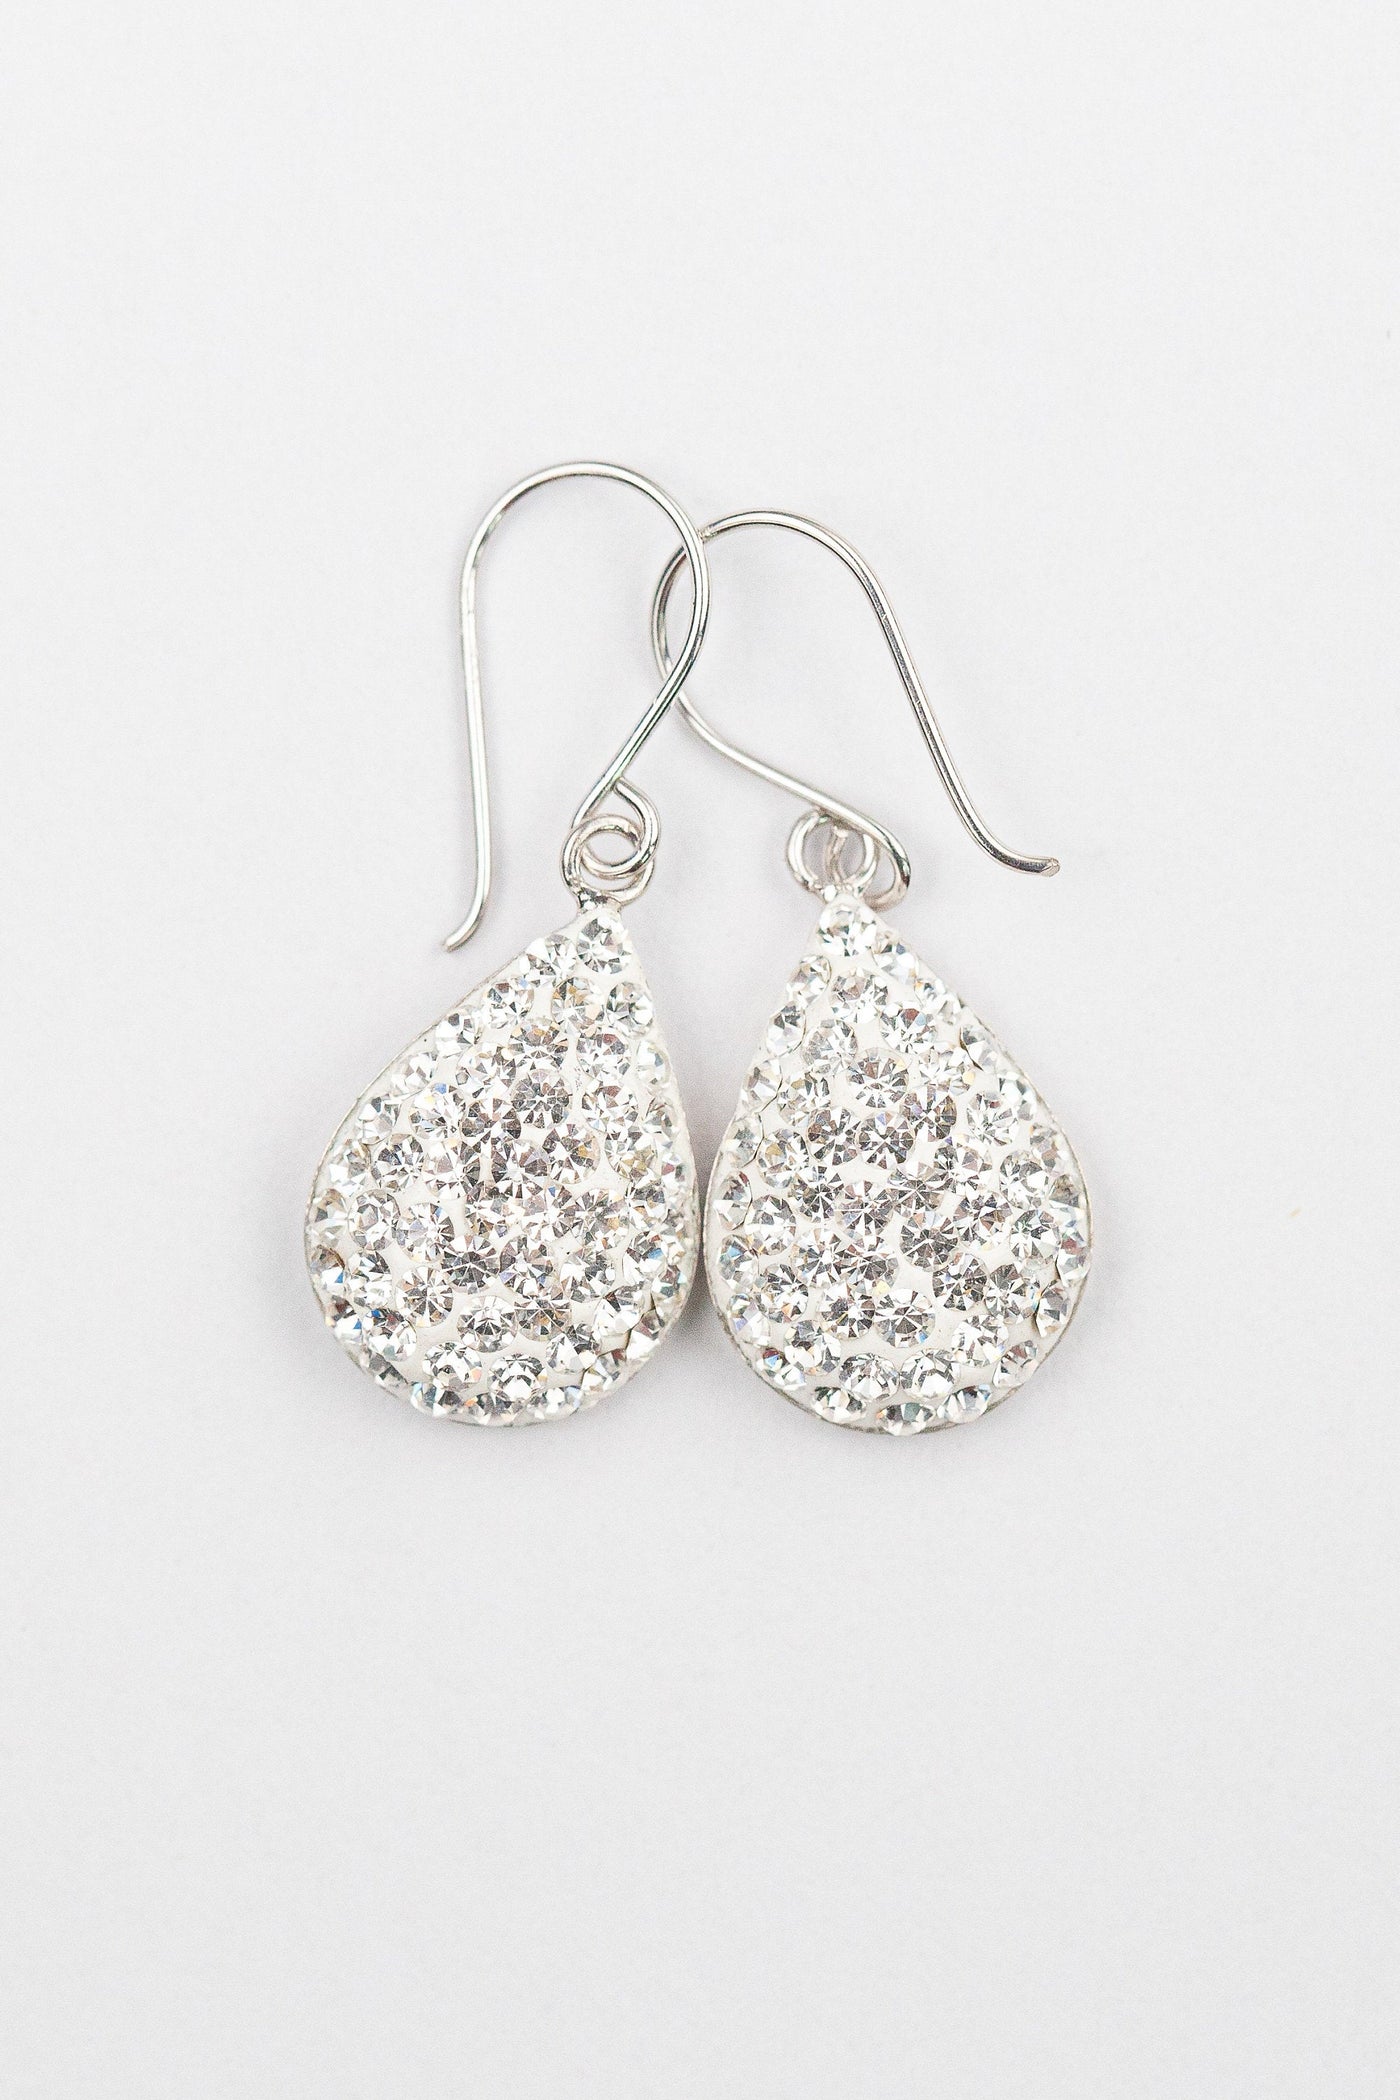 Swarovski Crystal Round Teardrop Silver Earrings in Clear | Annie and Sisters